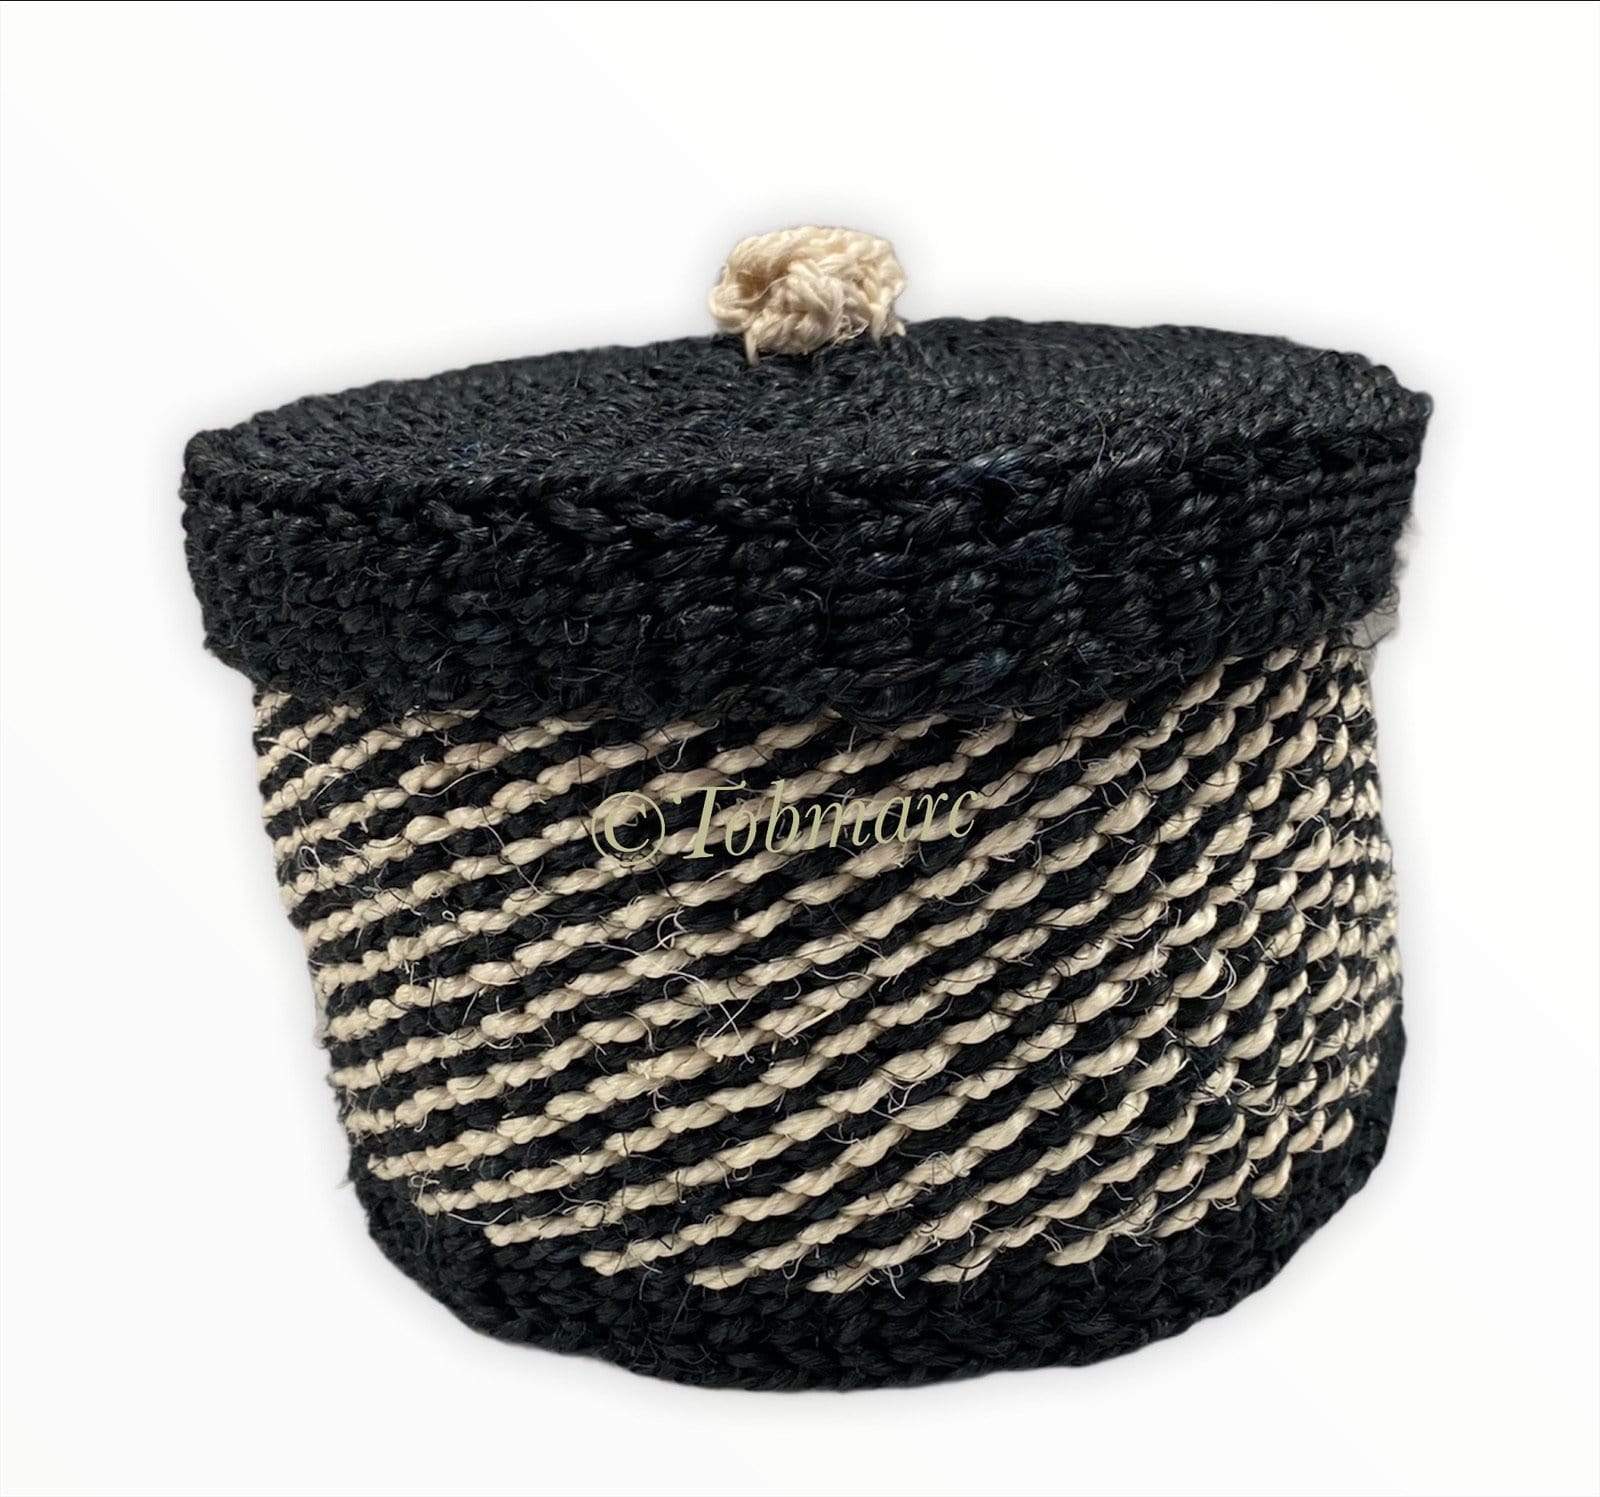 Tobmarc Home Decor & Gifts  Black and White TWIN-Small Baskets with a Lid, basket storage, Handwoven Mini Basket